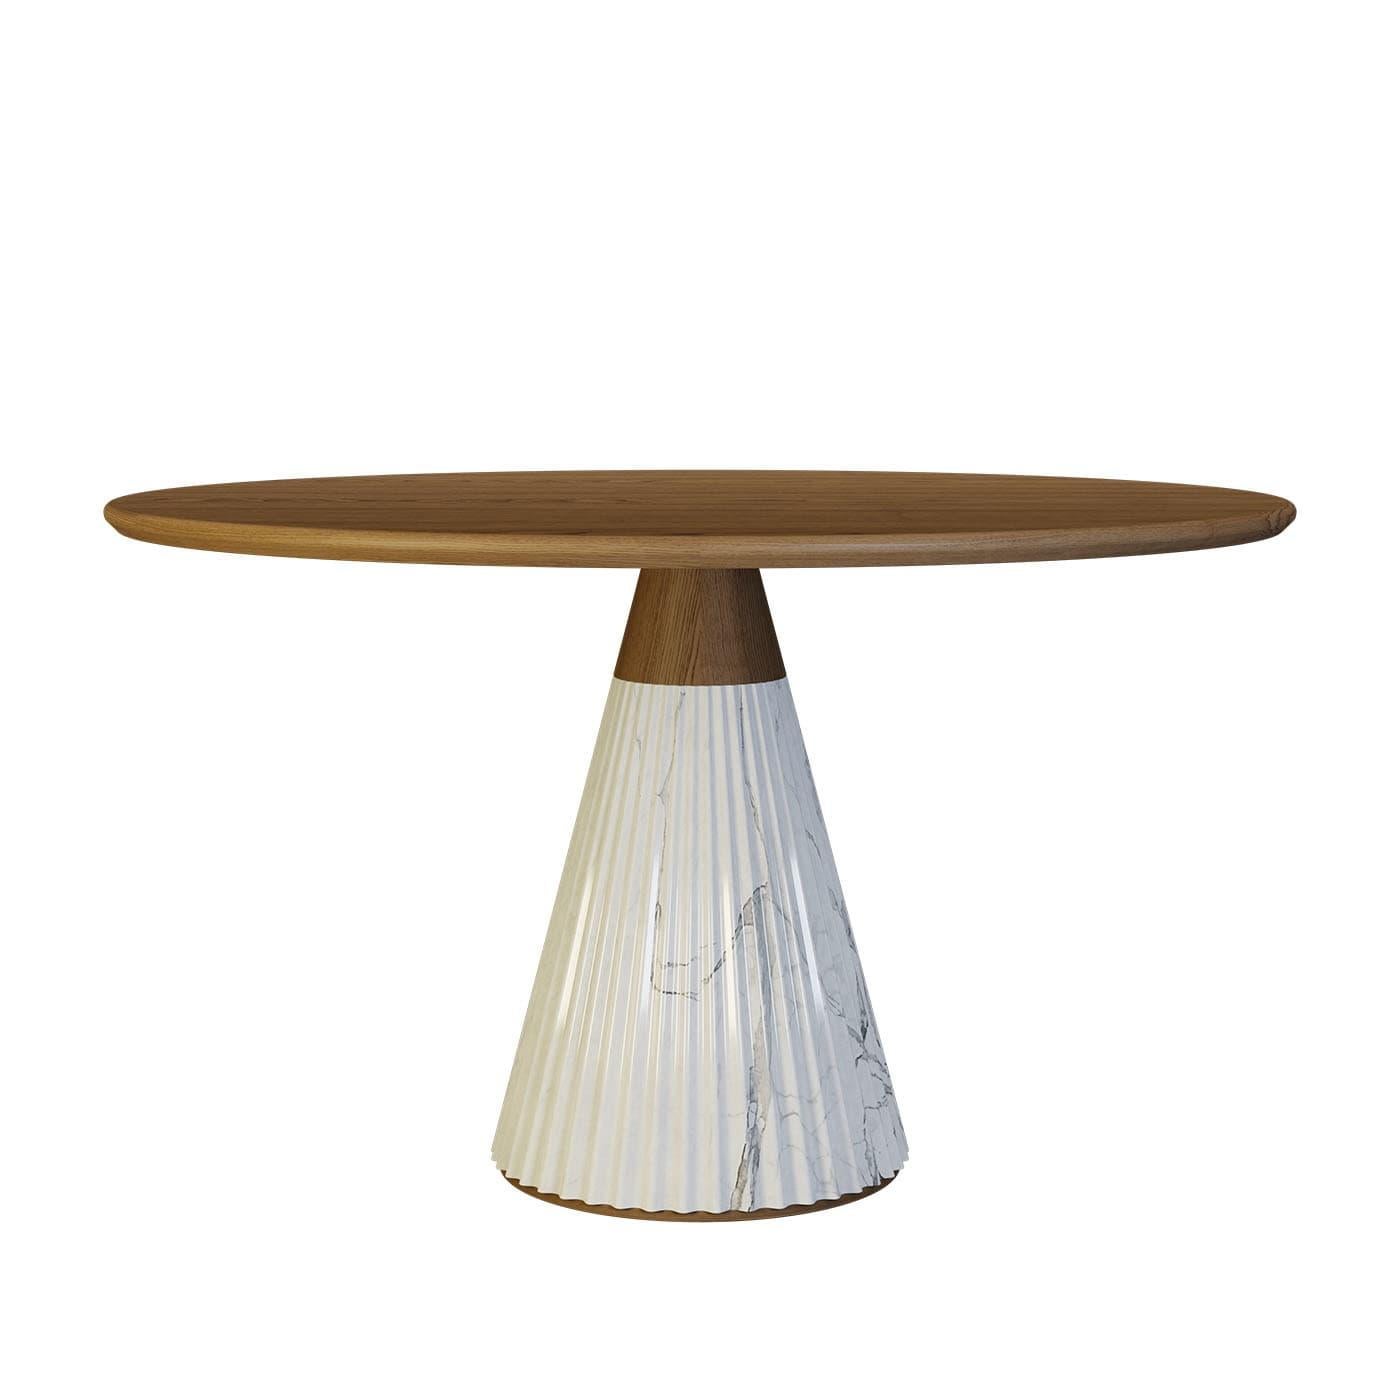 An iconic design of contemporary sophistication, this gorgeous round table by Libero Rutilo will add a refined and elegant accent to a modern living or dining area. Handmade of ash wood, the round top rests on a conical base made of pleated white